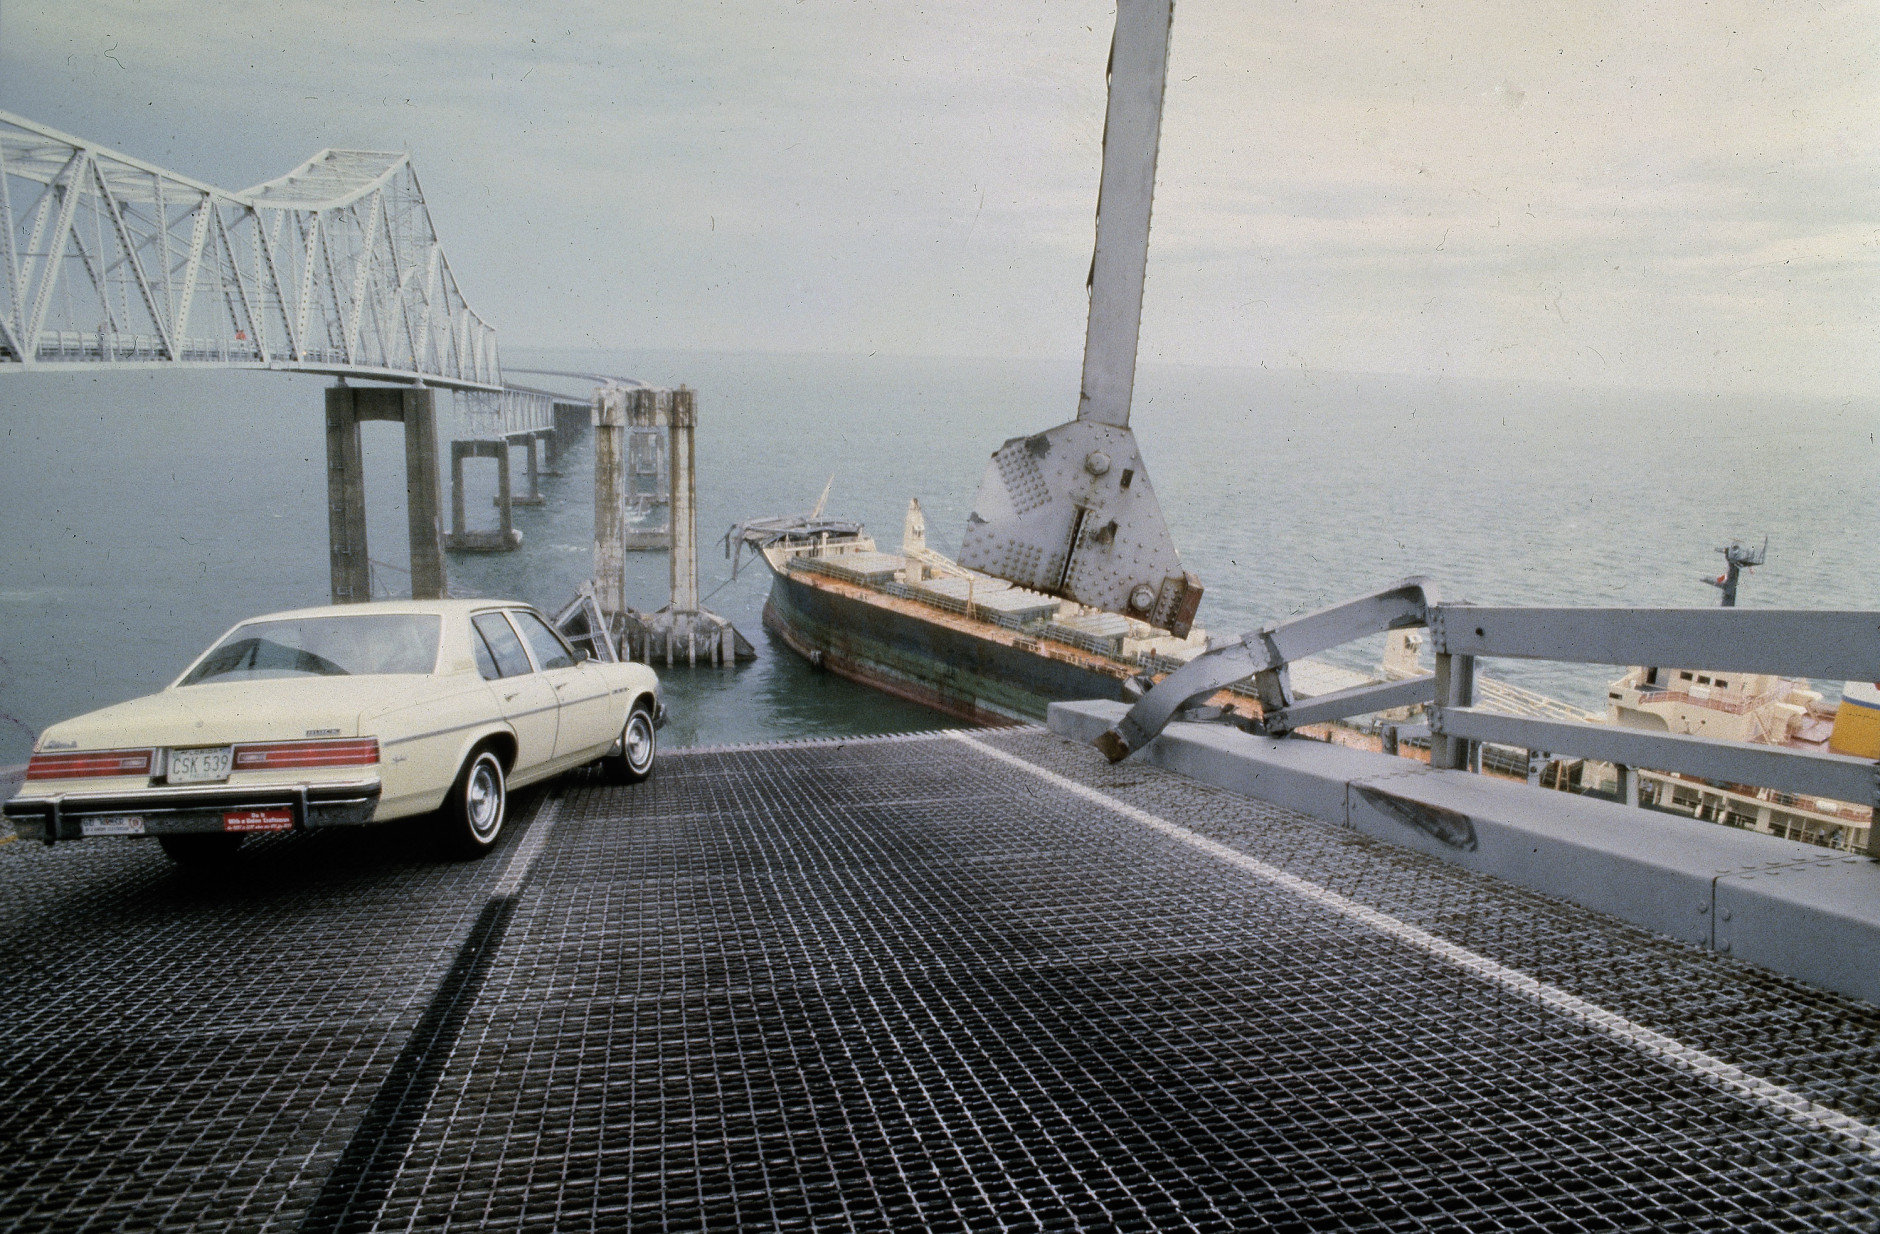 A car is halted at the edge of the Sunshine Skyway Bridge across Tampa Bay, Fla.,  after the freighter Summit Venture struck the bridge during a thunderstorm and tore away a large part of the span, May 1980.  At least 31 persons were killed, 23 of them aboard a bus that toppled into the water.  (AP Photo/Jackie Green)